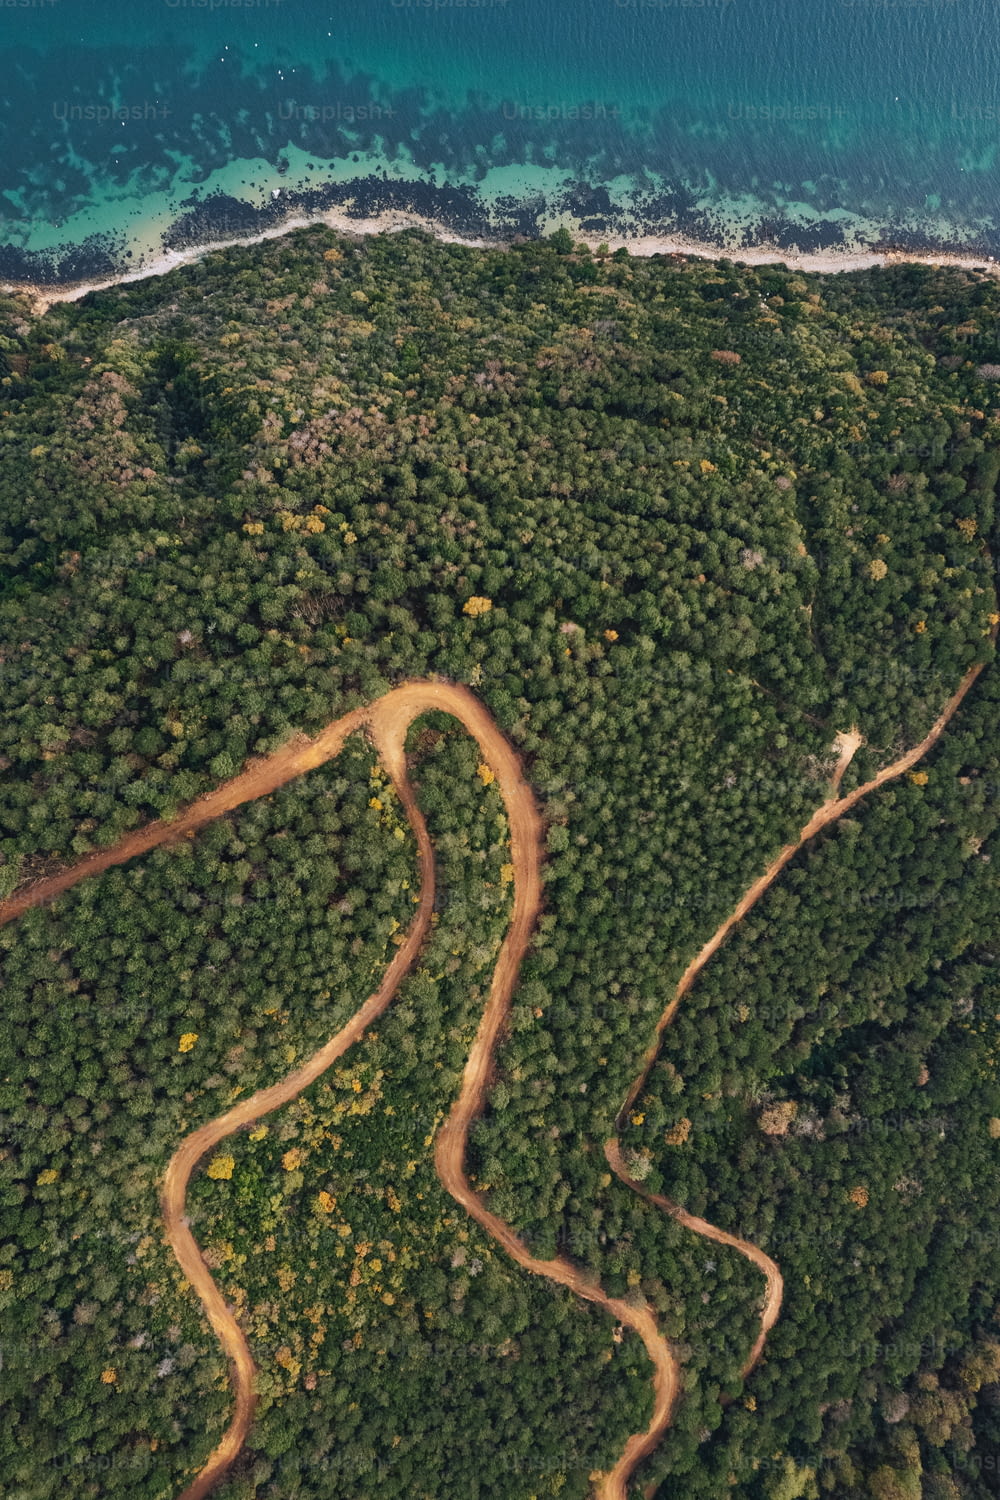 an aerial view of a winding road in the middle of a forest